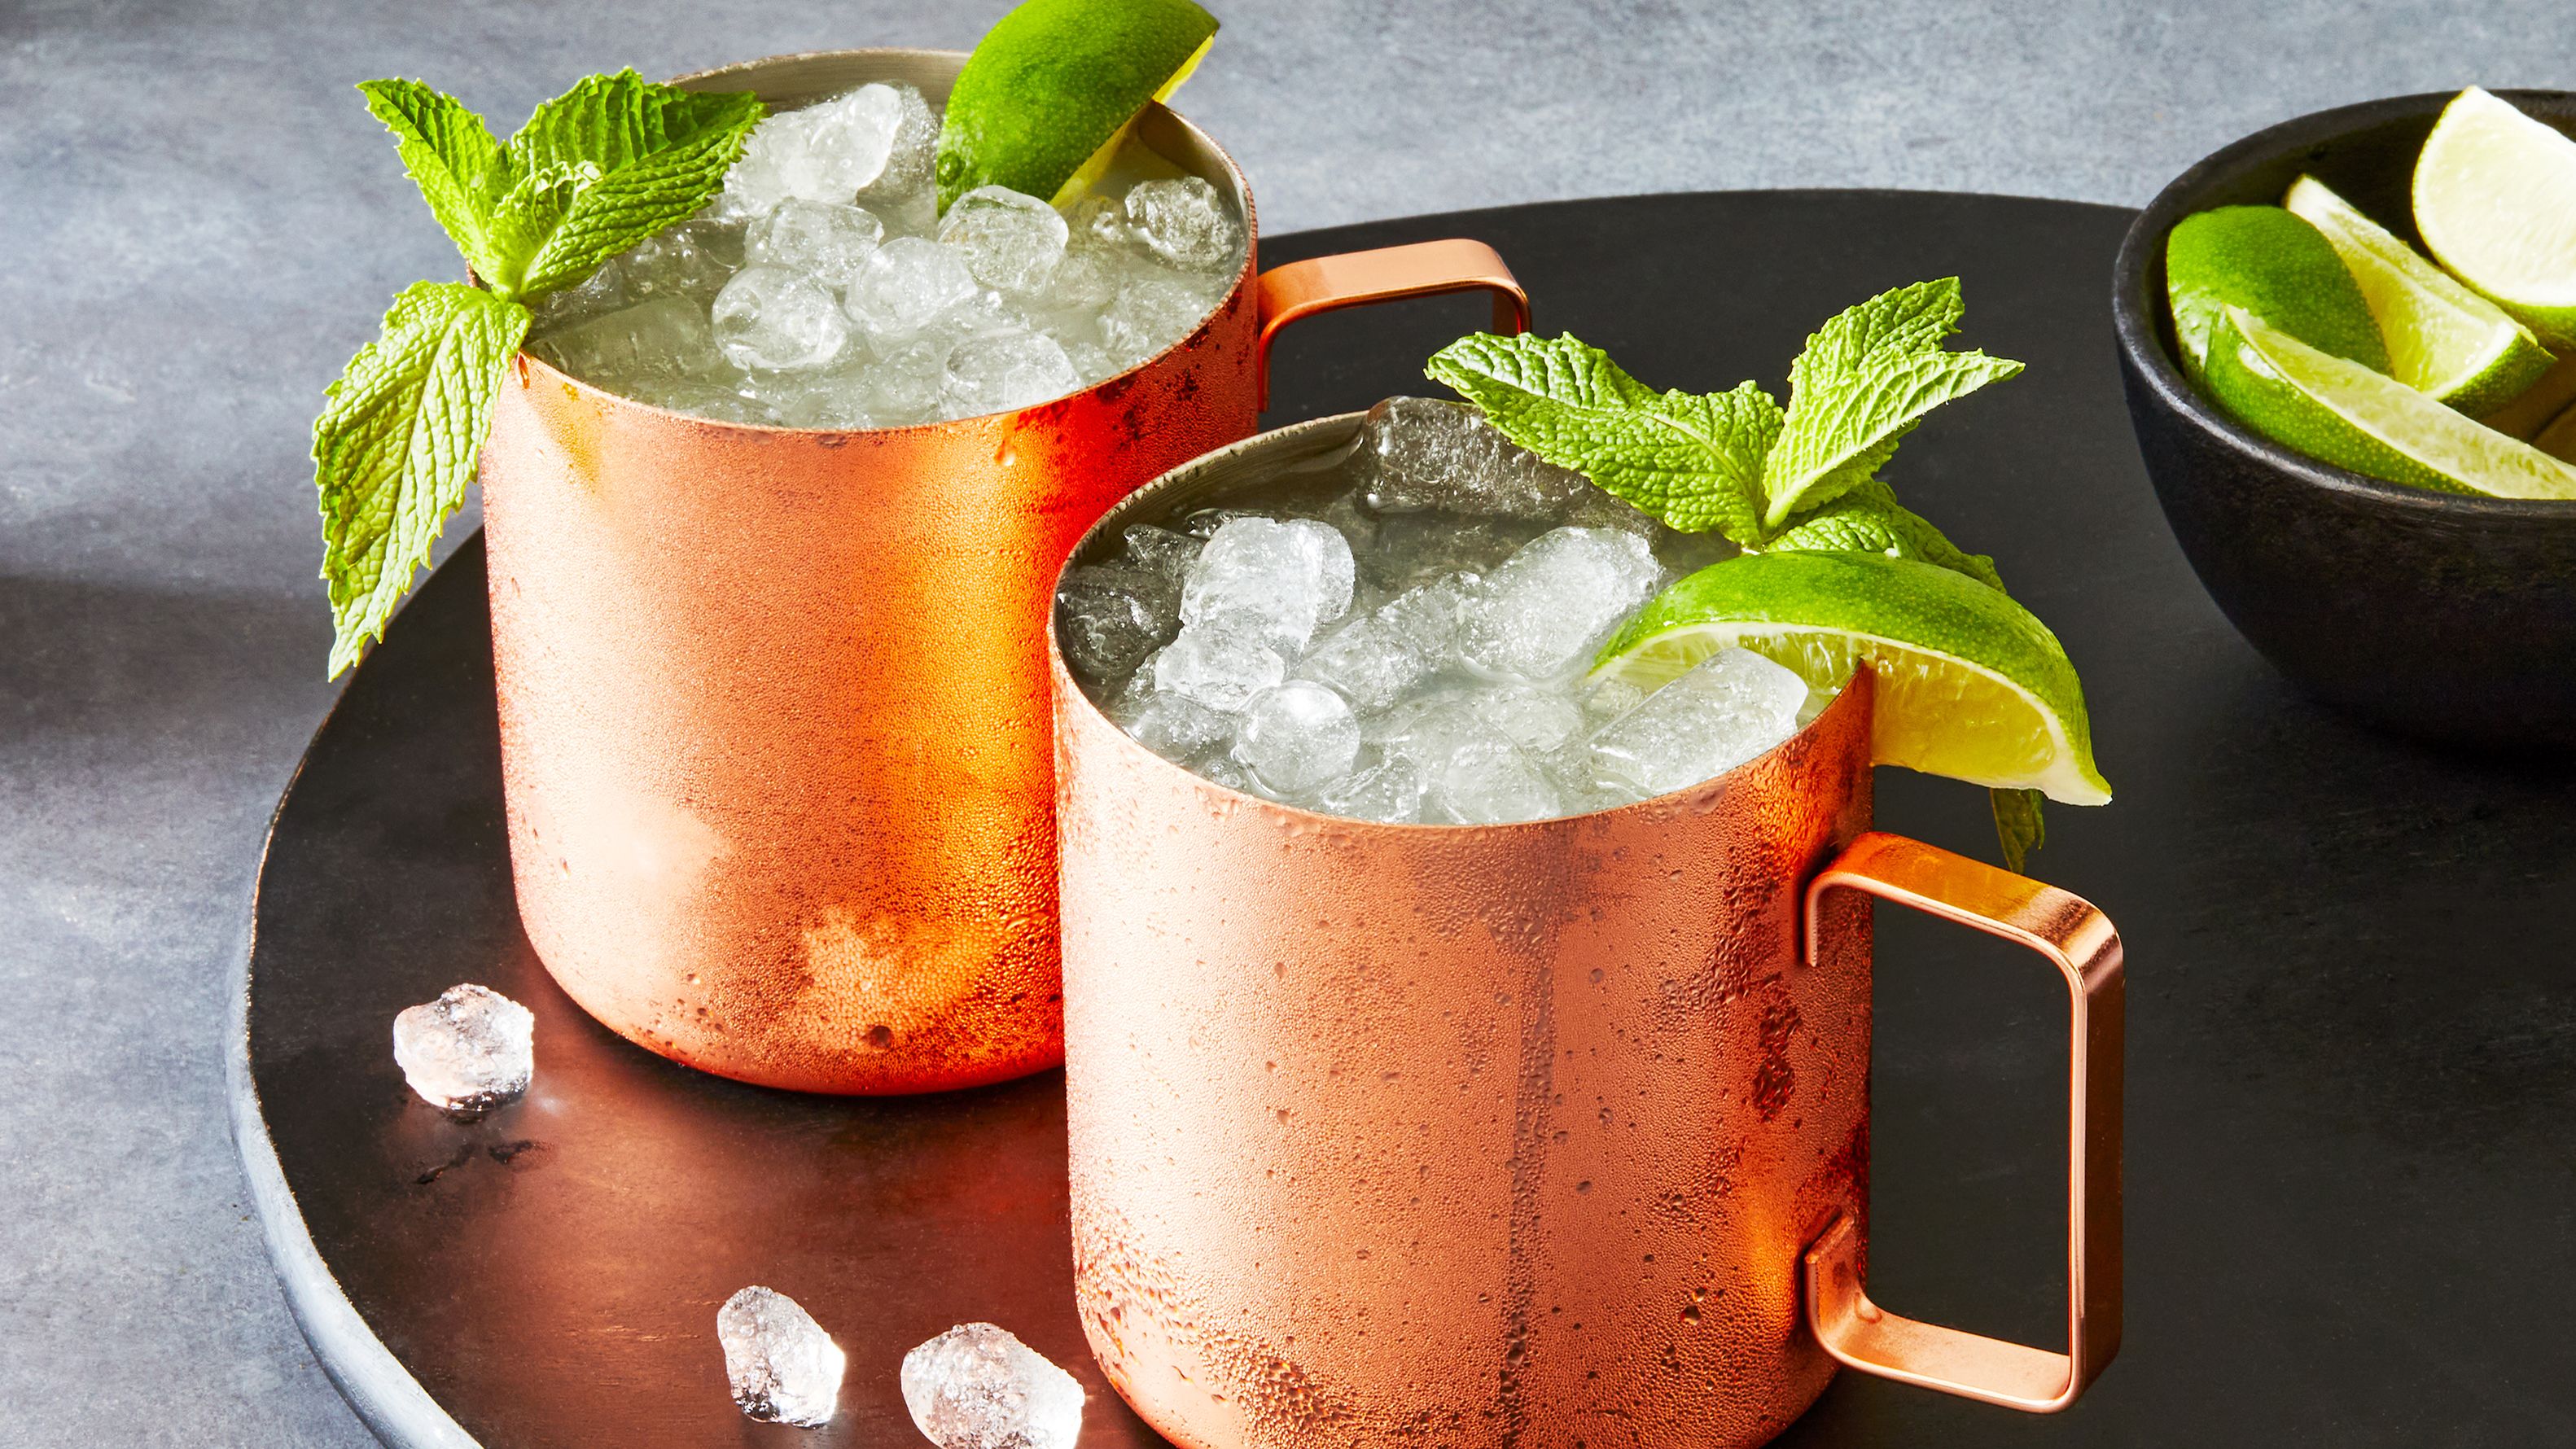 Best Moscow Mule Cocktail Recipe - How To Make AMoscow Mule